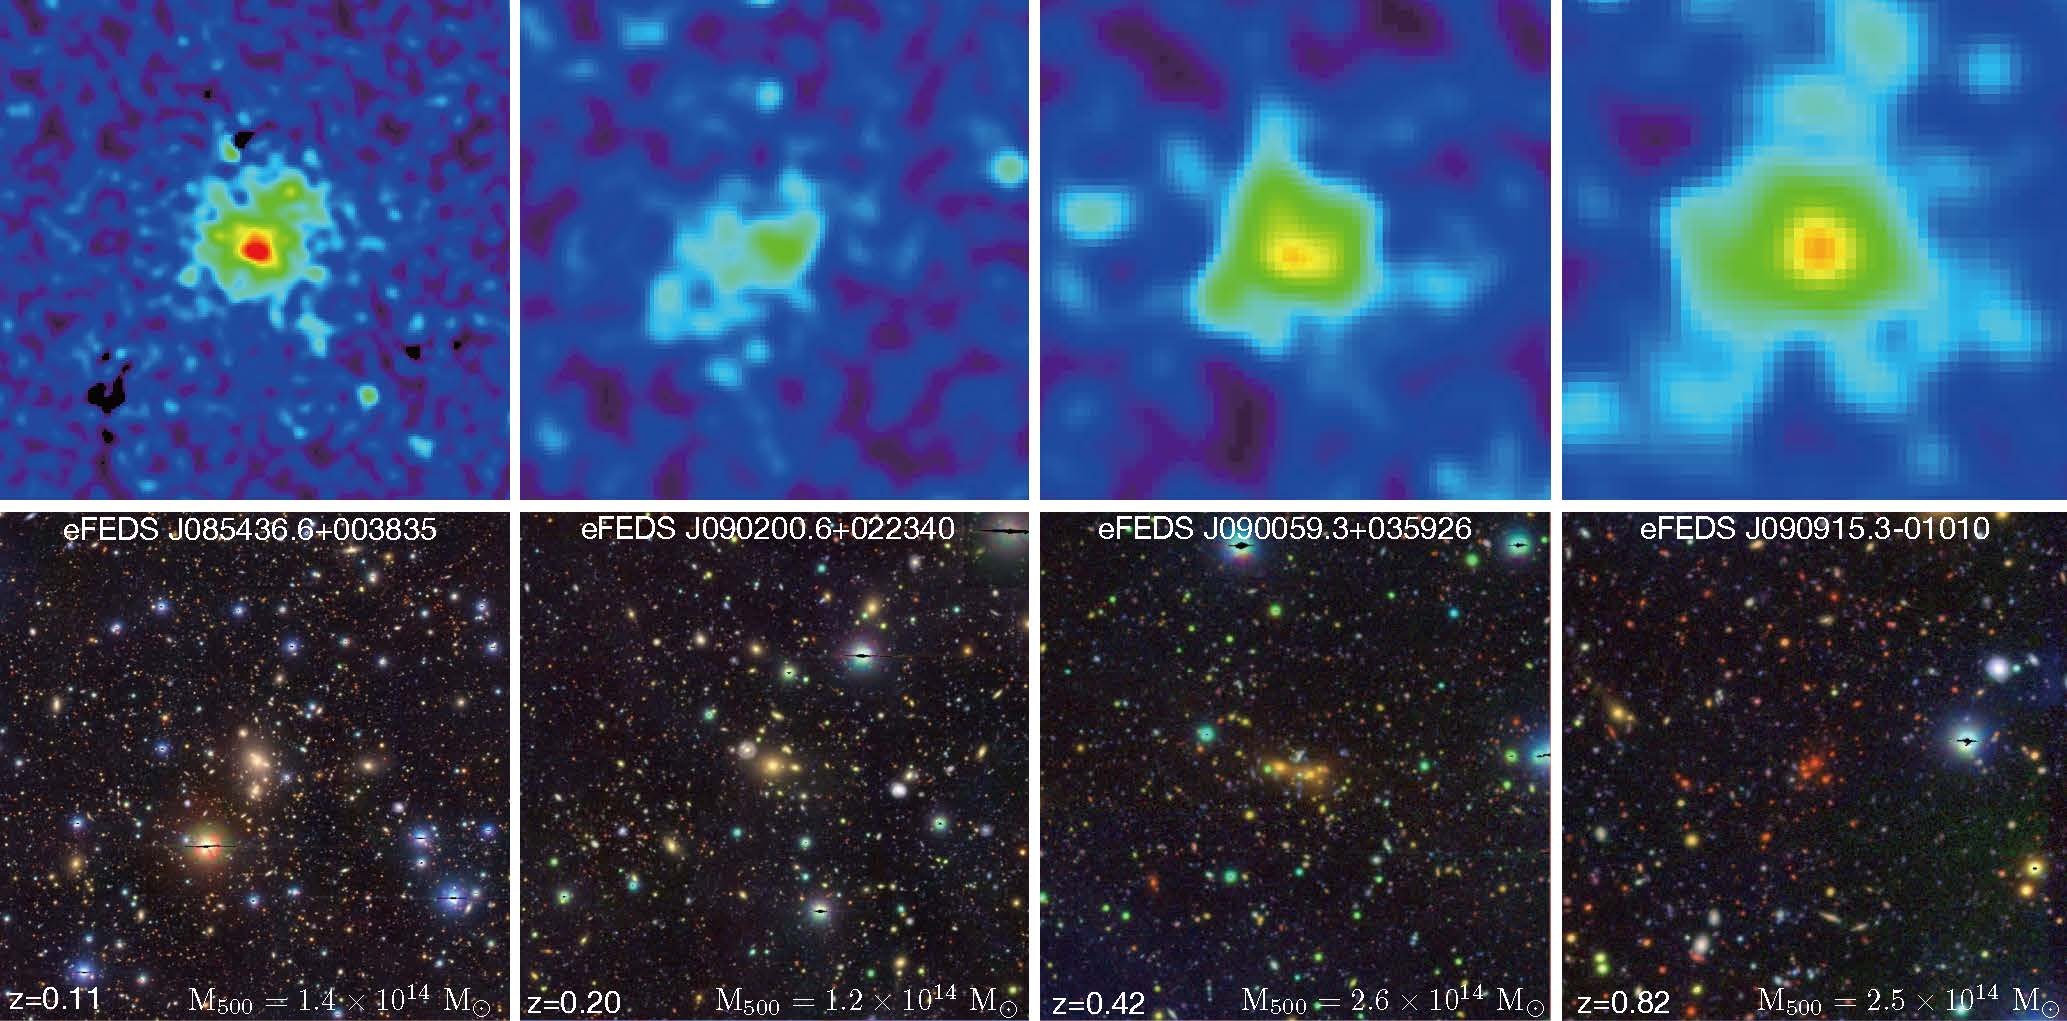 Three eFEDS clusters are shown across the panels from left to right. The top (bottom) row shows the X-ray (optical) imaging of the cluster observed by the eROSITA telescope (HSC survey). The cluster name, mass, and the redshift are labeled in the optical imaging on the bottom row. By combining optical and X-ray imaging, we can efficiently search for galaxy clusters and measure their masses at the same time.  Image courtesy: Dr. Matthias Klein.